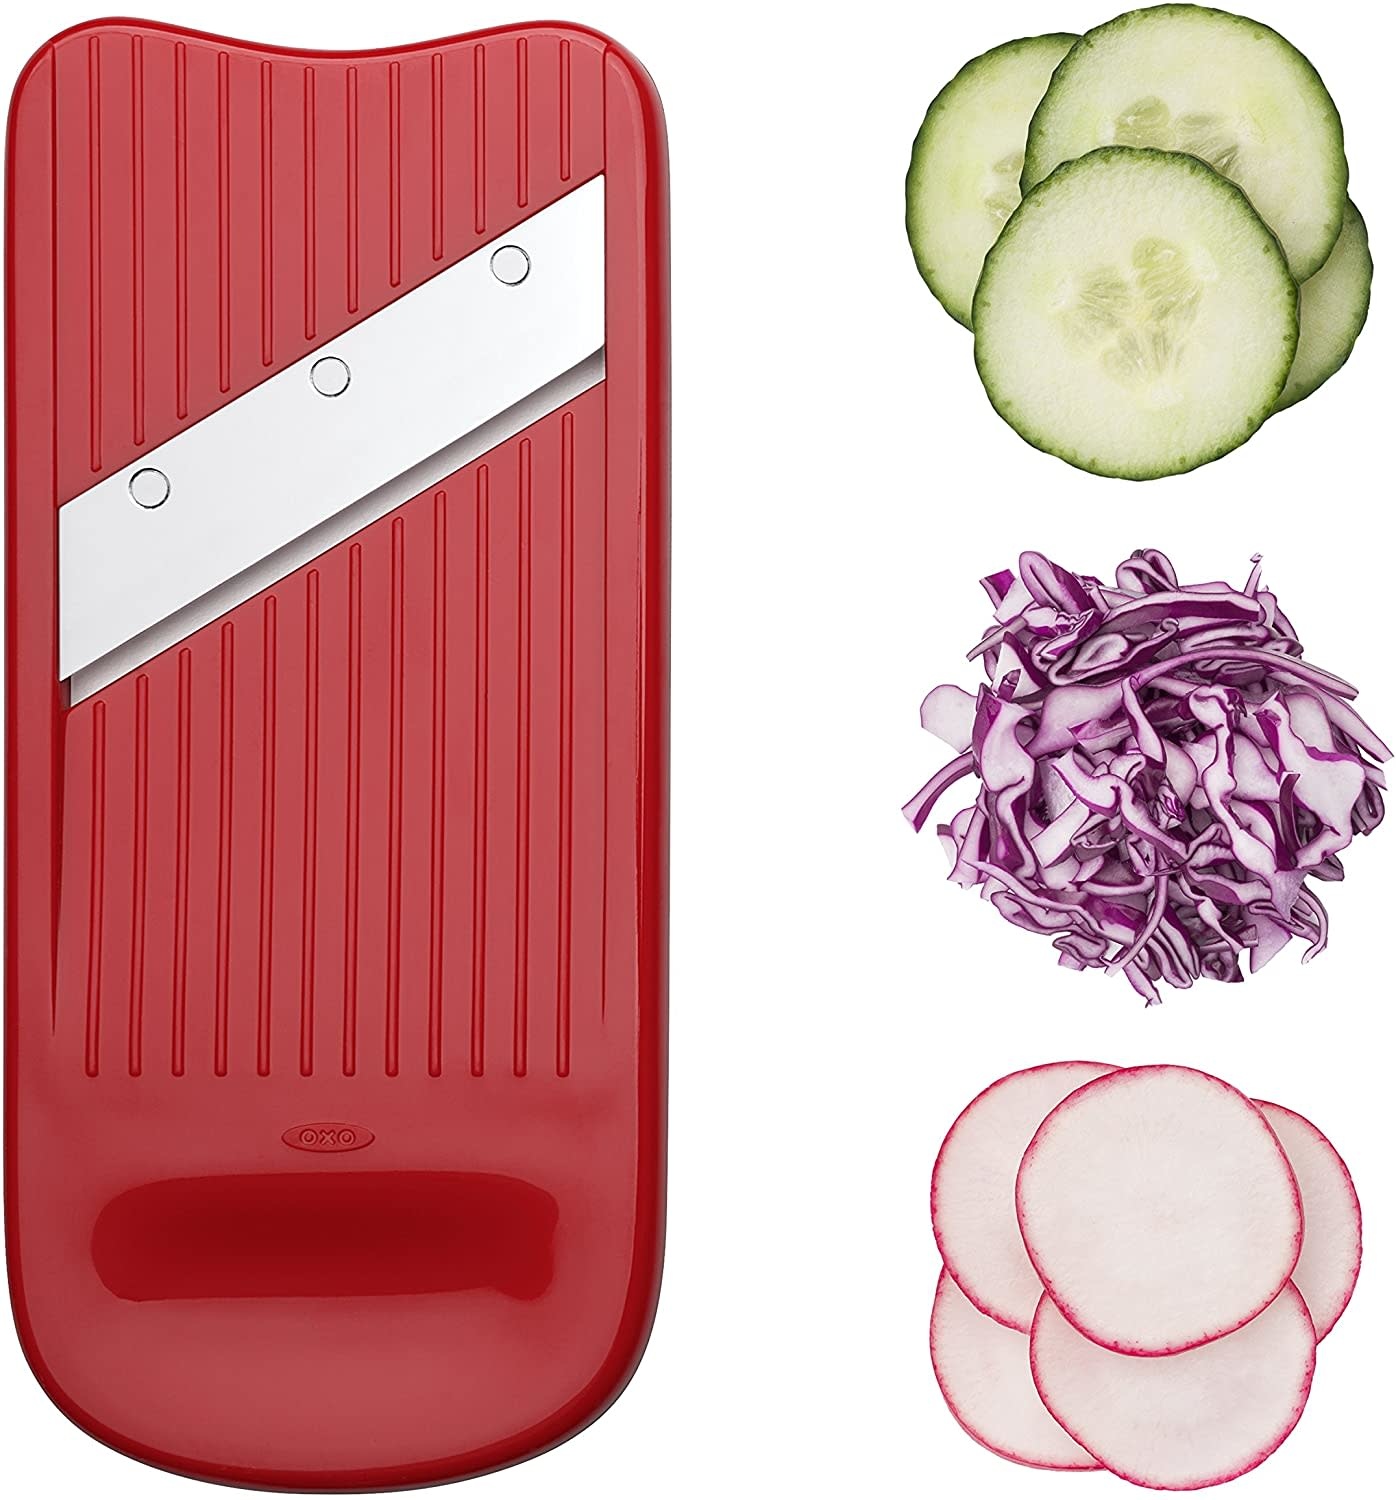 OXO Good Grips Complete Grate & Slice Set - NEW, White